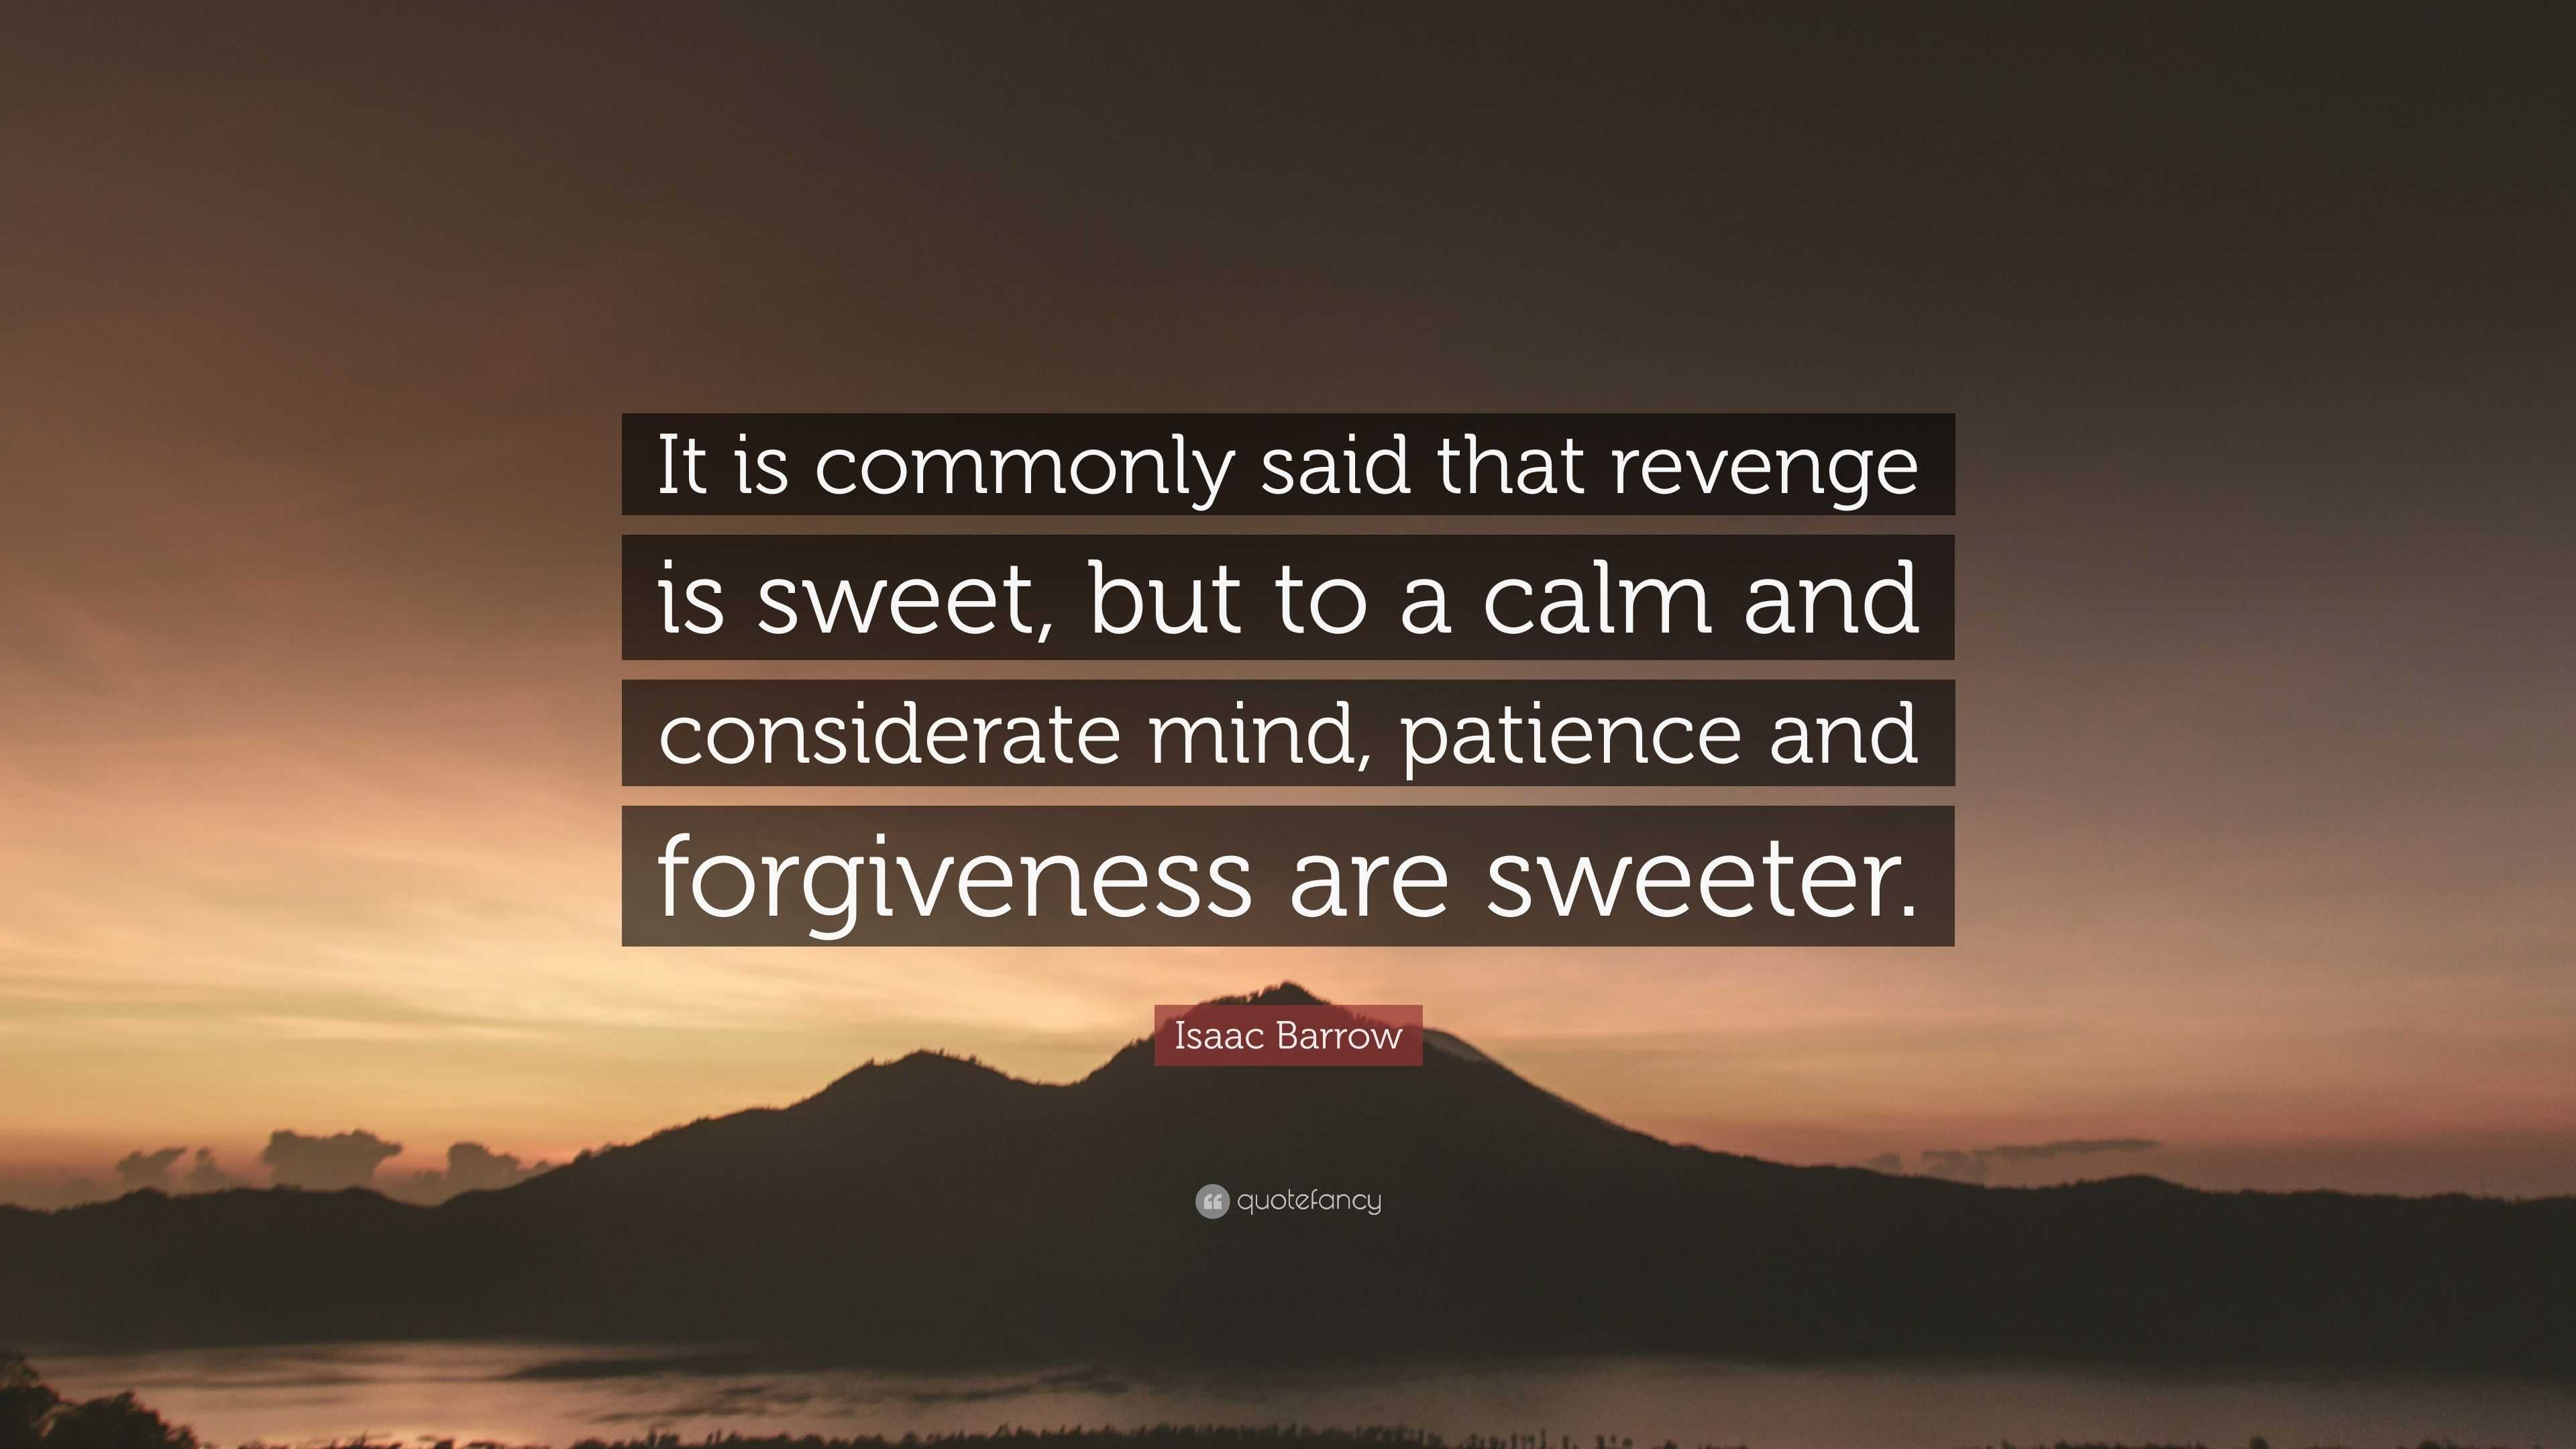 Isaac Barrow Quote: “It is commonly said that revenge is sweet, but to